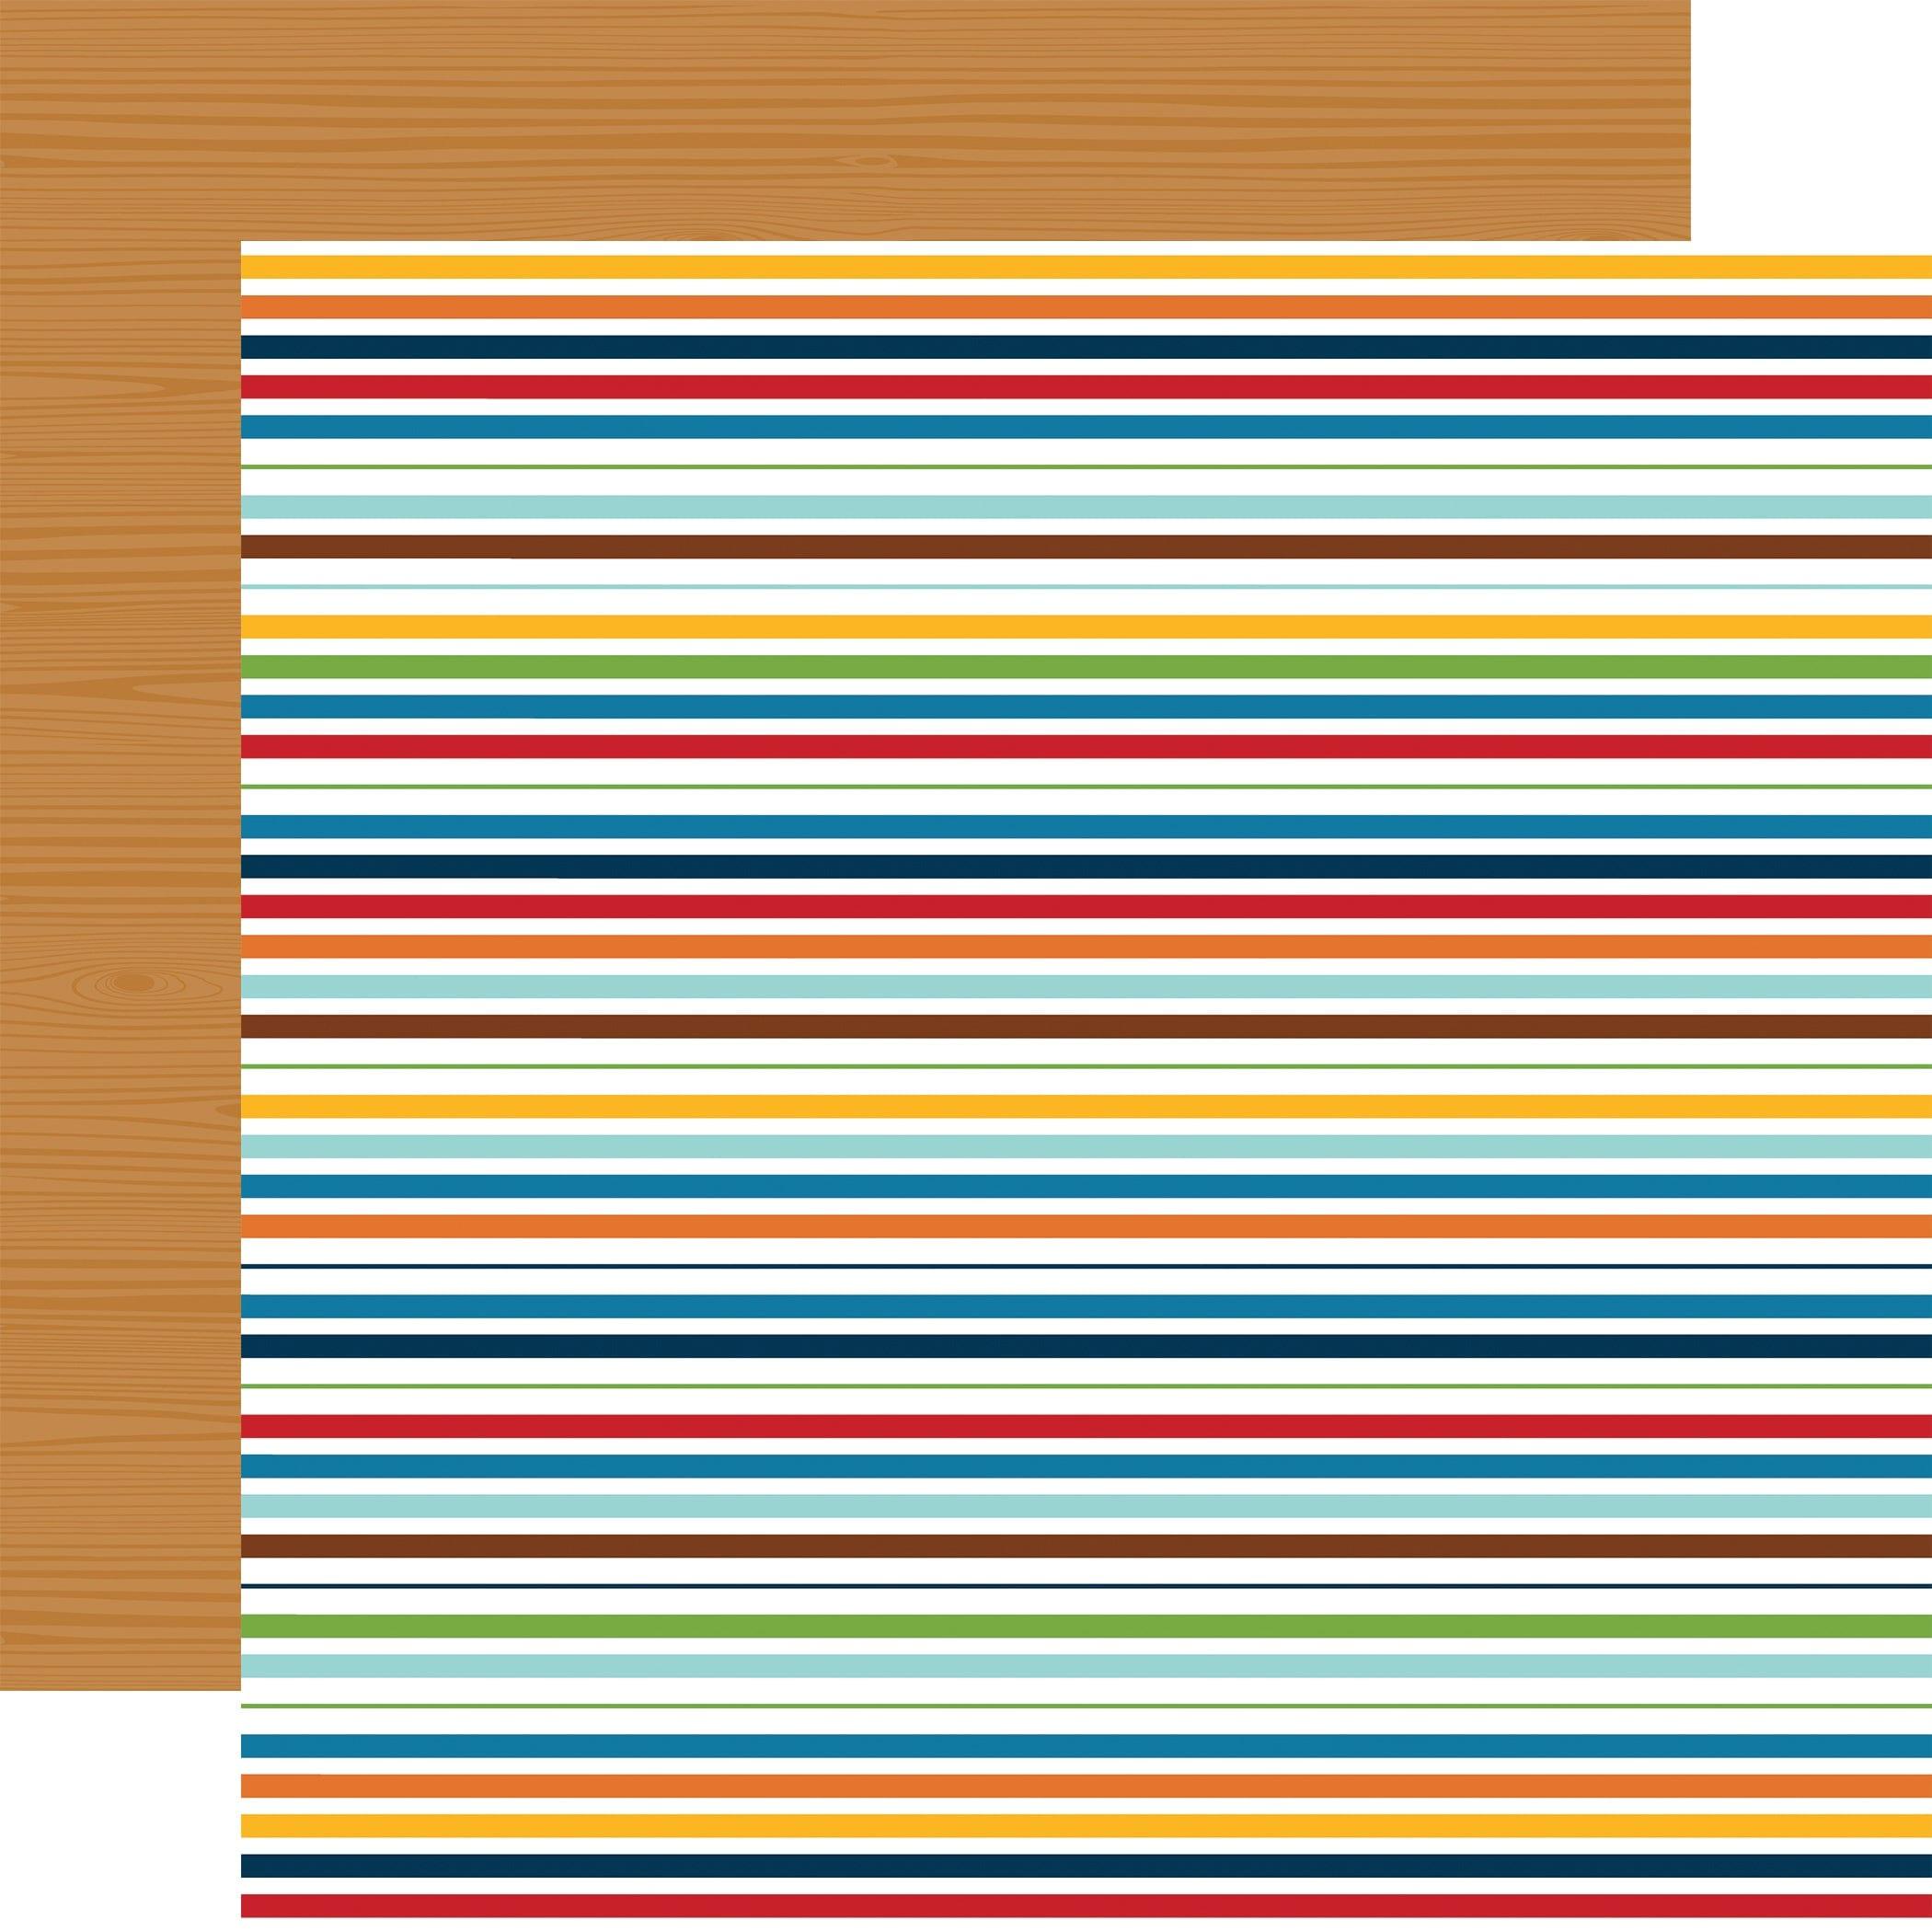 Fun On The Farm Collection Sweet Stripes 12 x 12 Double-Sided Scrapbook Paper by Echo Park Paper - Scrapbook Supply Companies